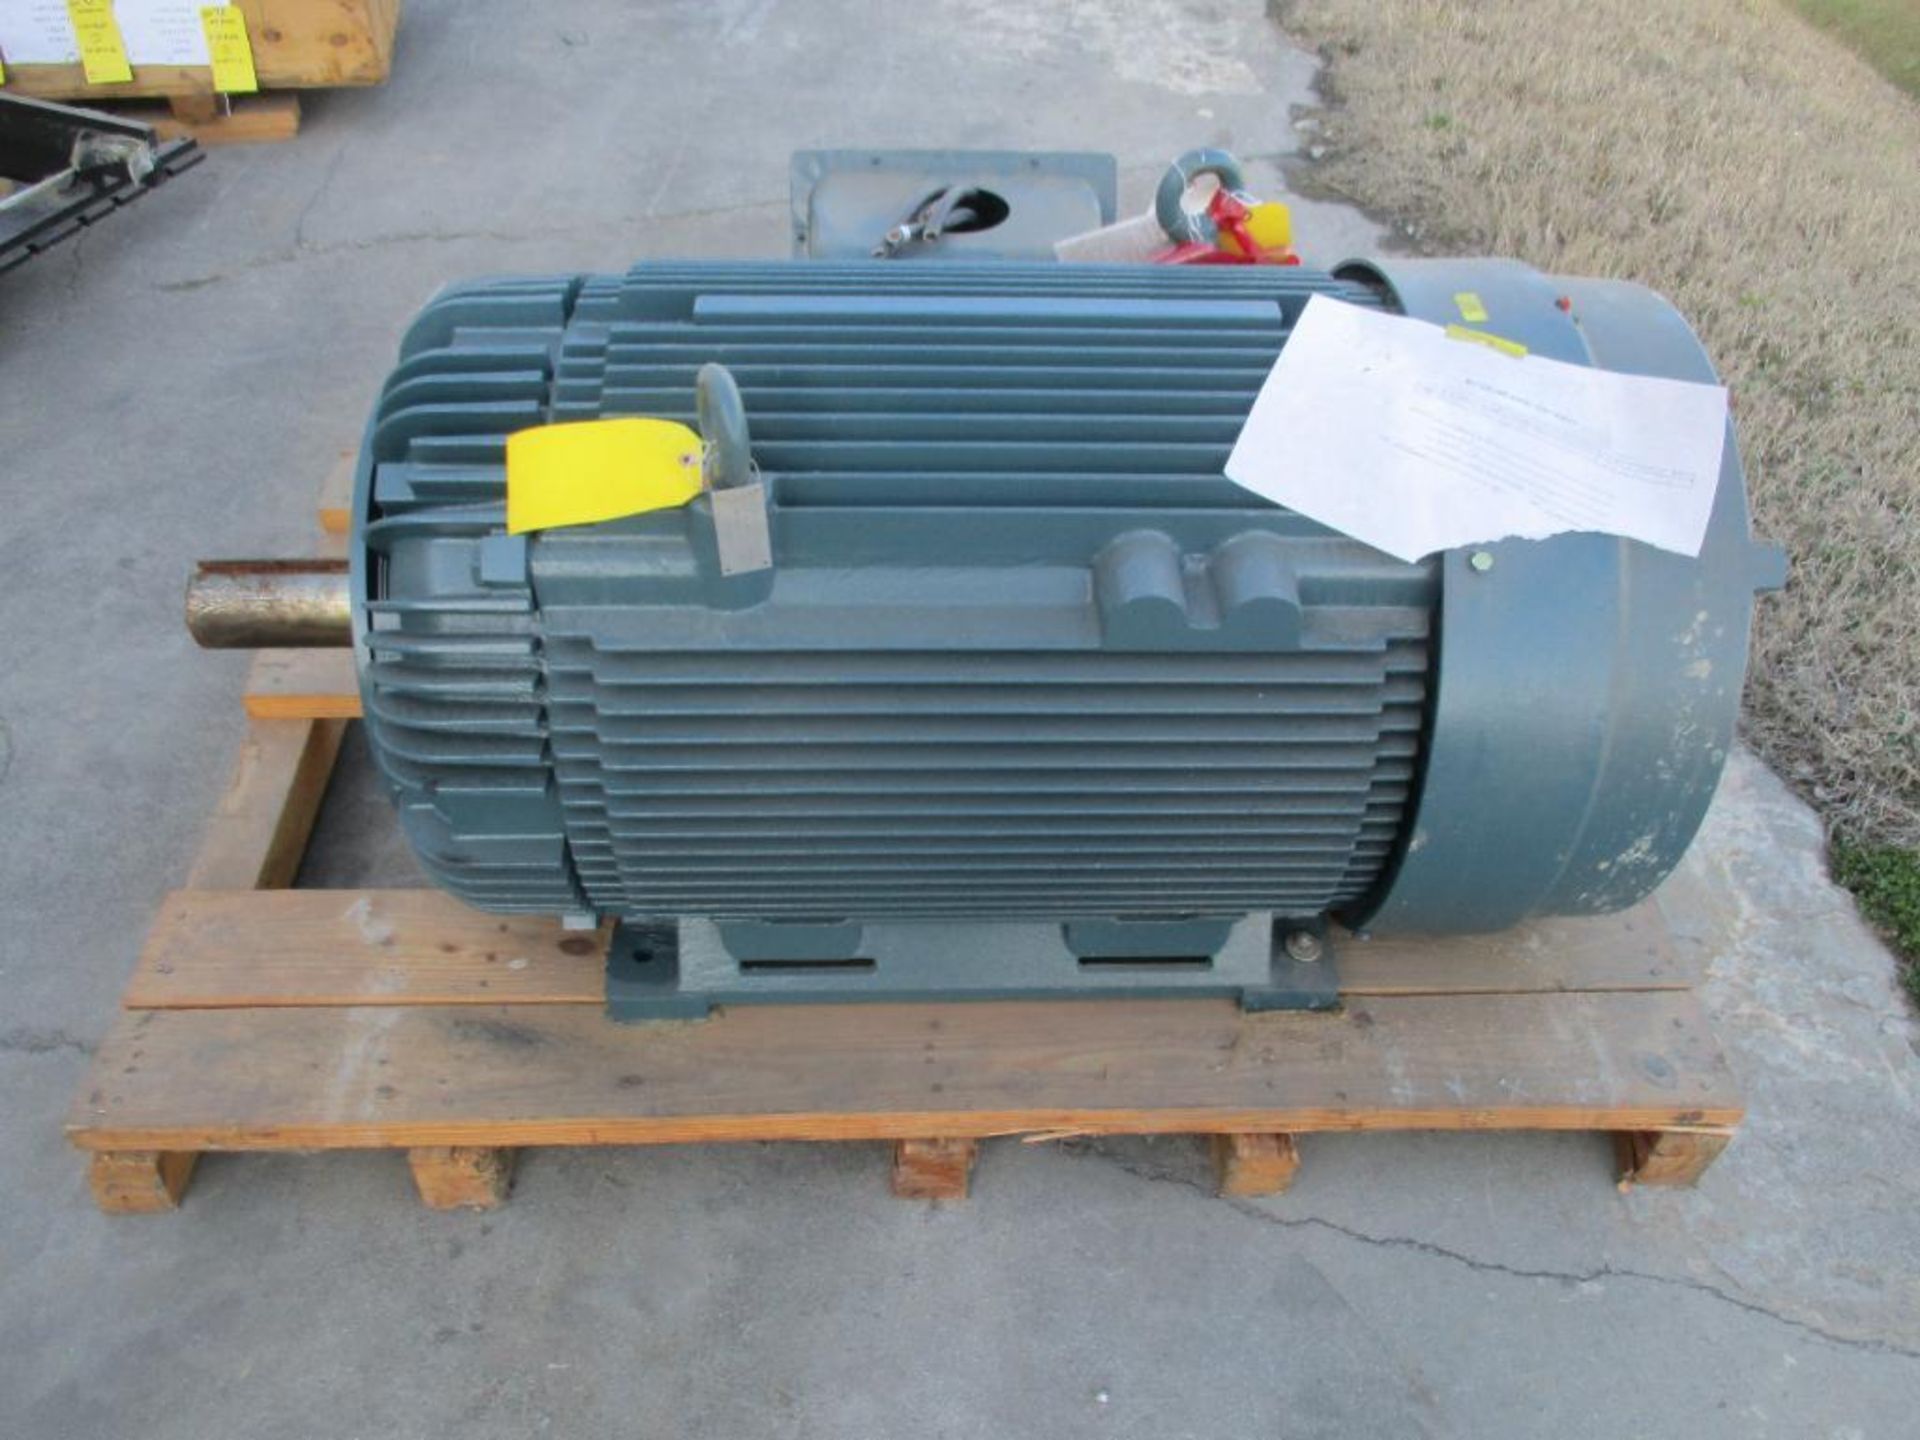 BALDOR 3 PHASE 200HP 1192-1785RPM 449T FRAME A/C MOTOR P/N A44-4710-2262 2916# LBS (THIS LOT IS FOB